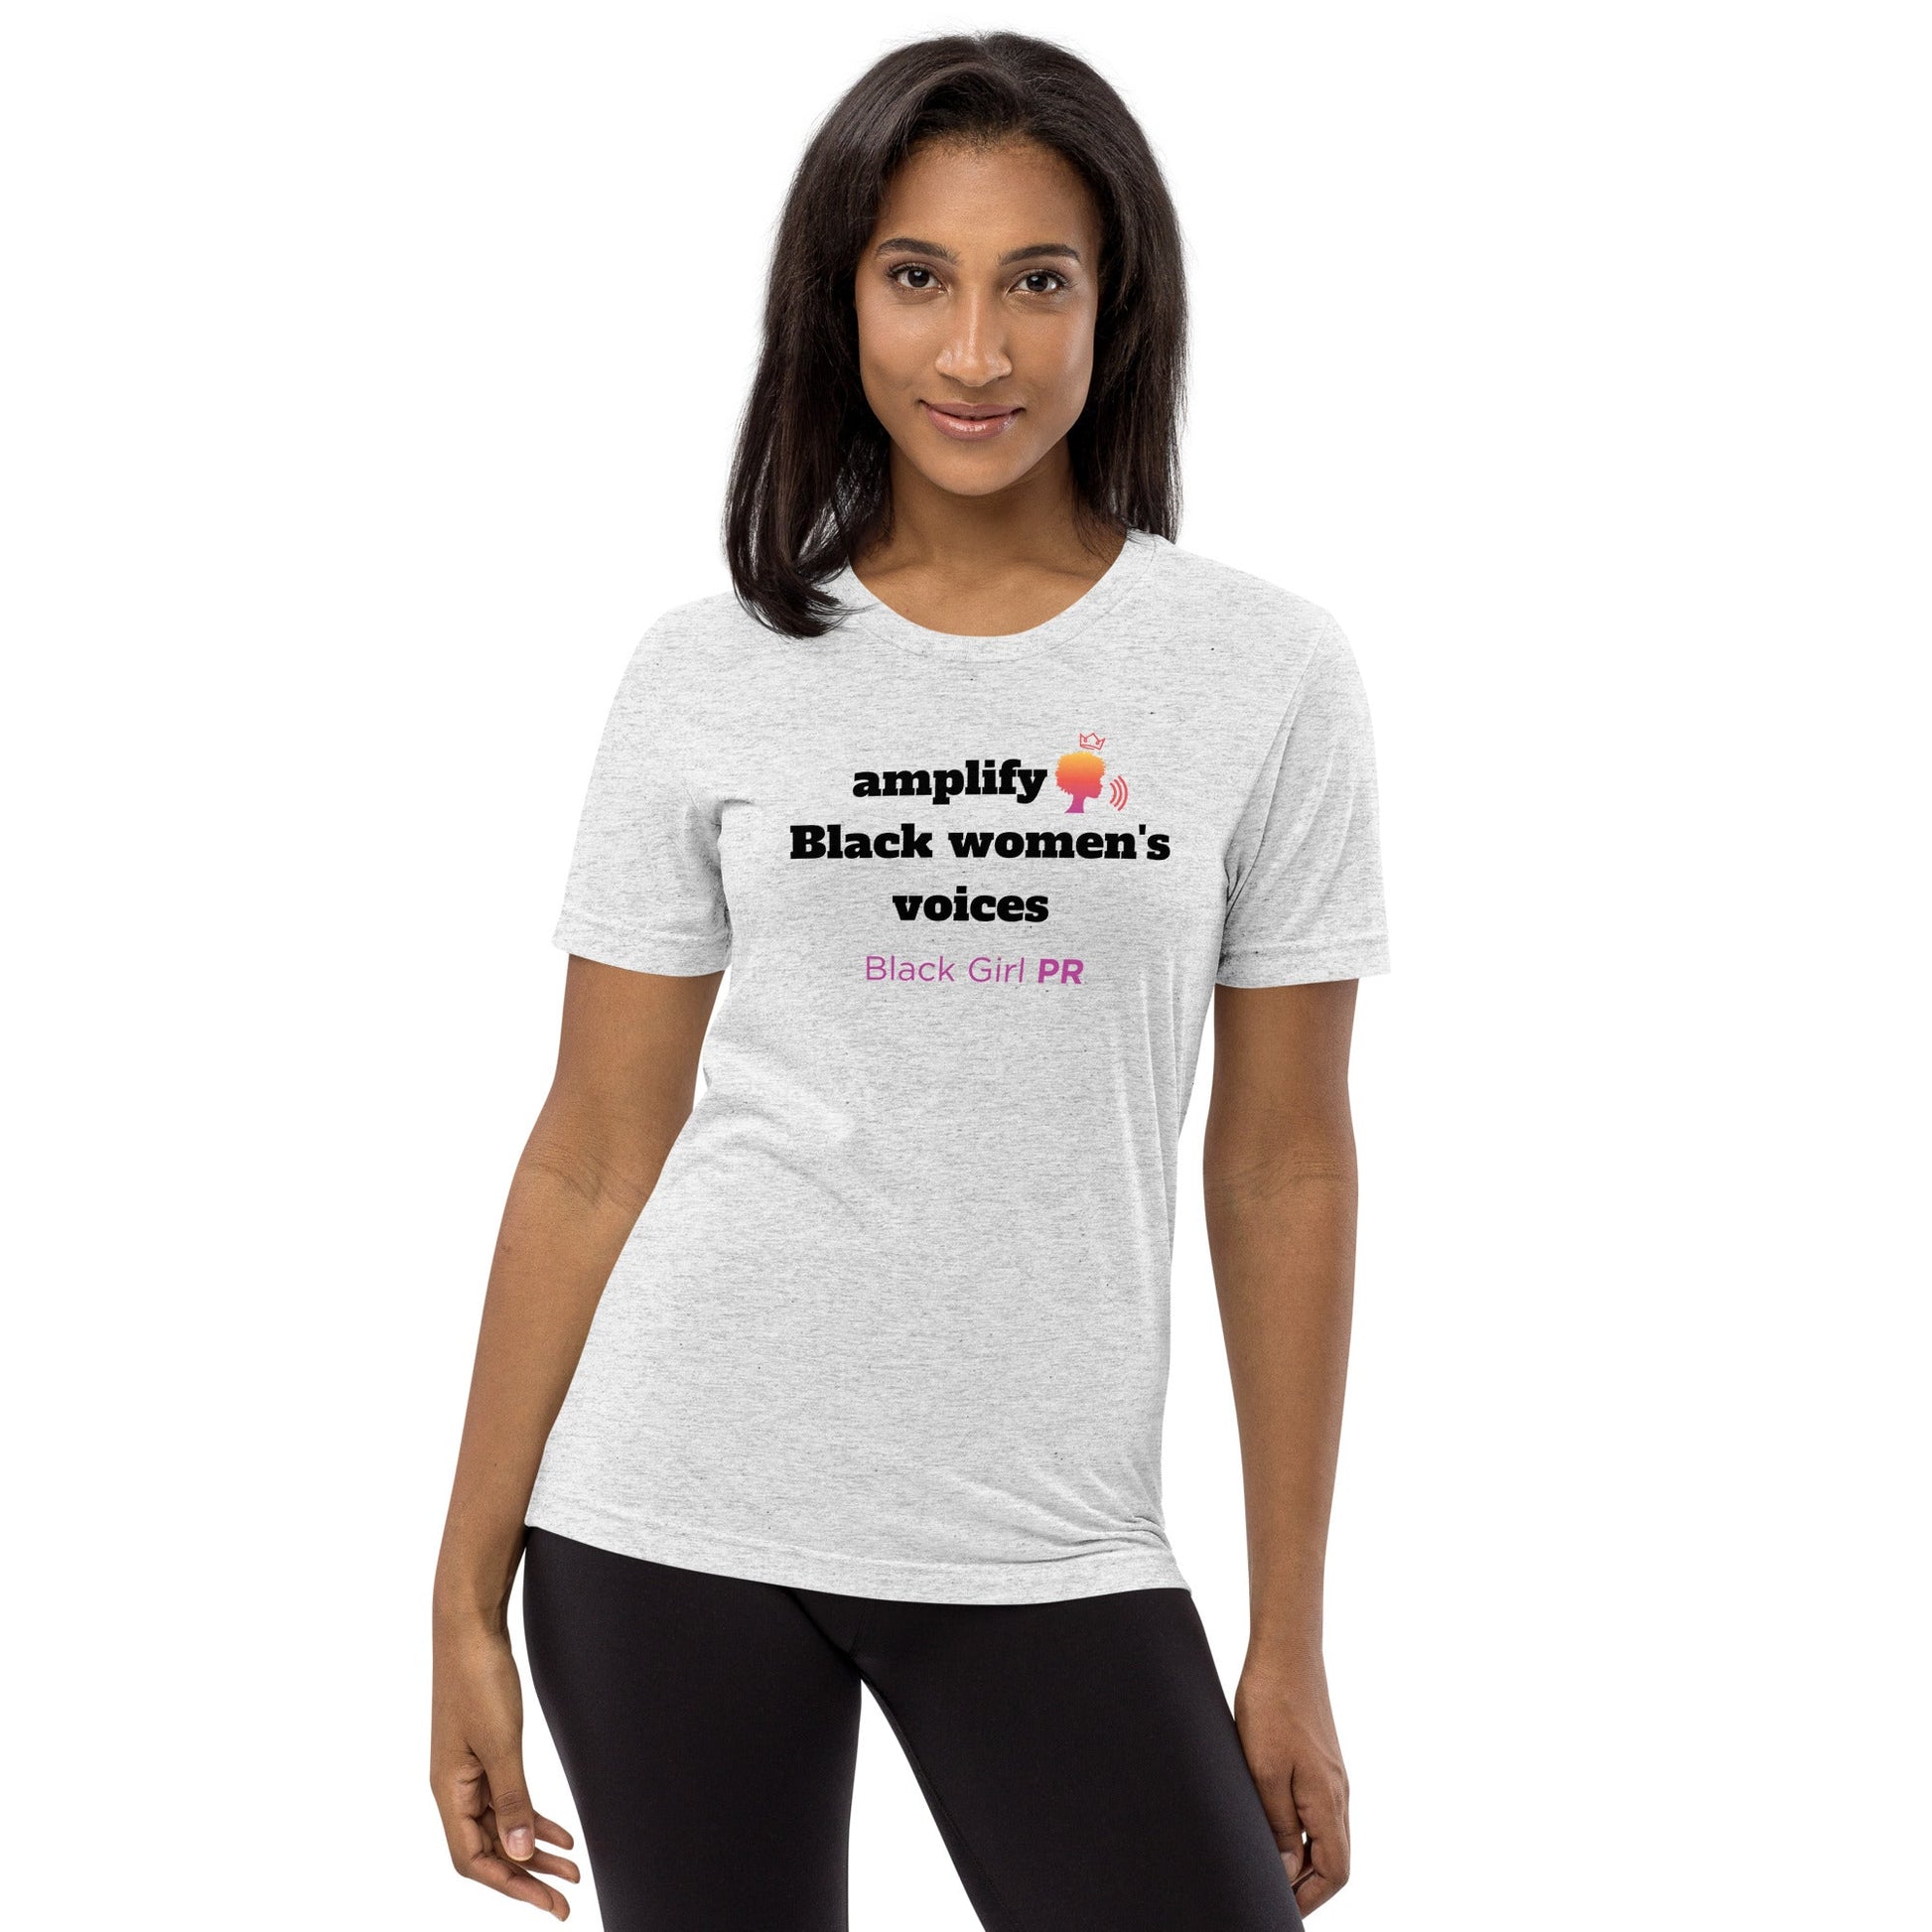 Amplify Black Women's Voices Fitted Short Sleeve T-Shirt - Black Girl PR™